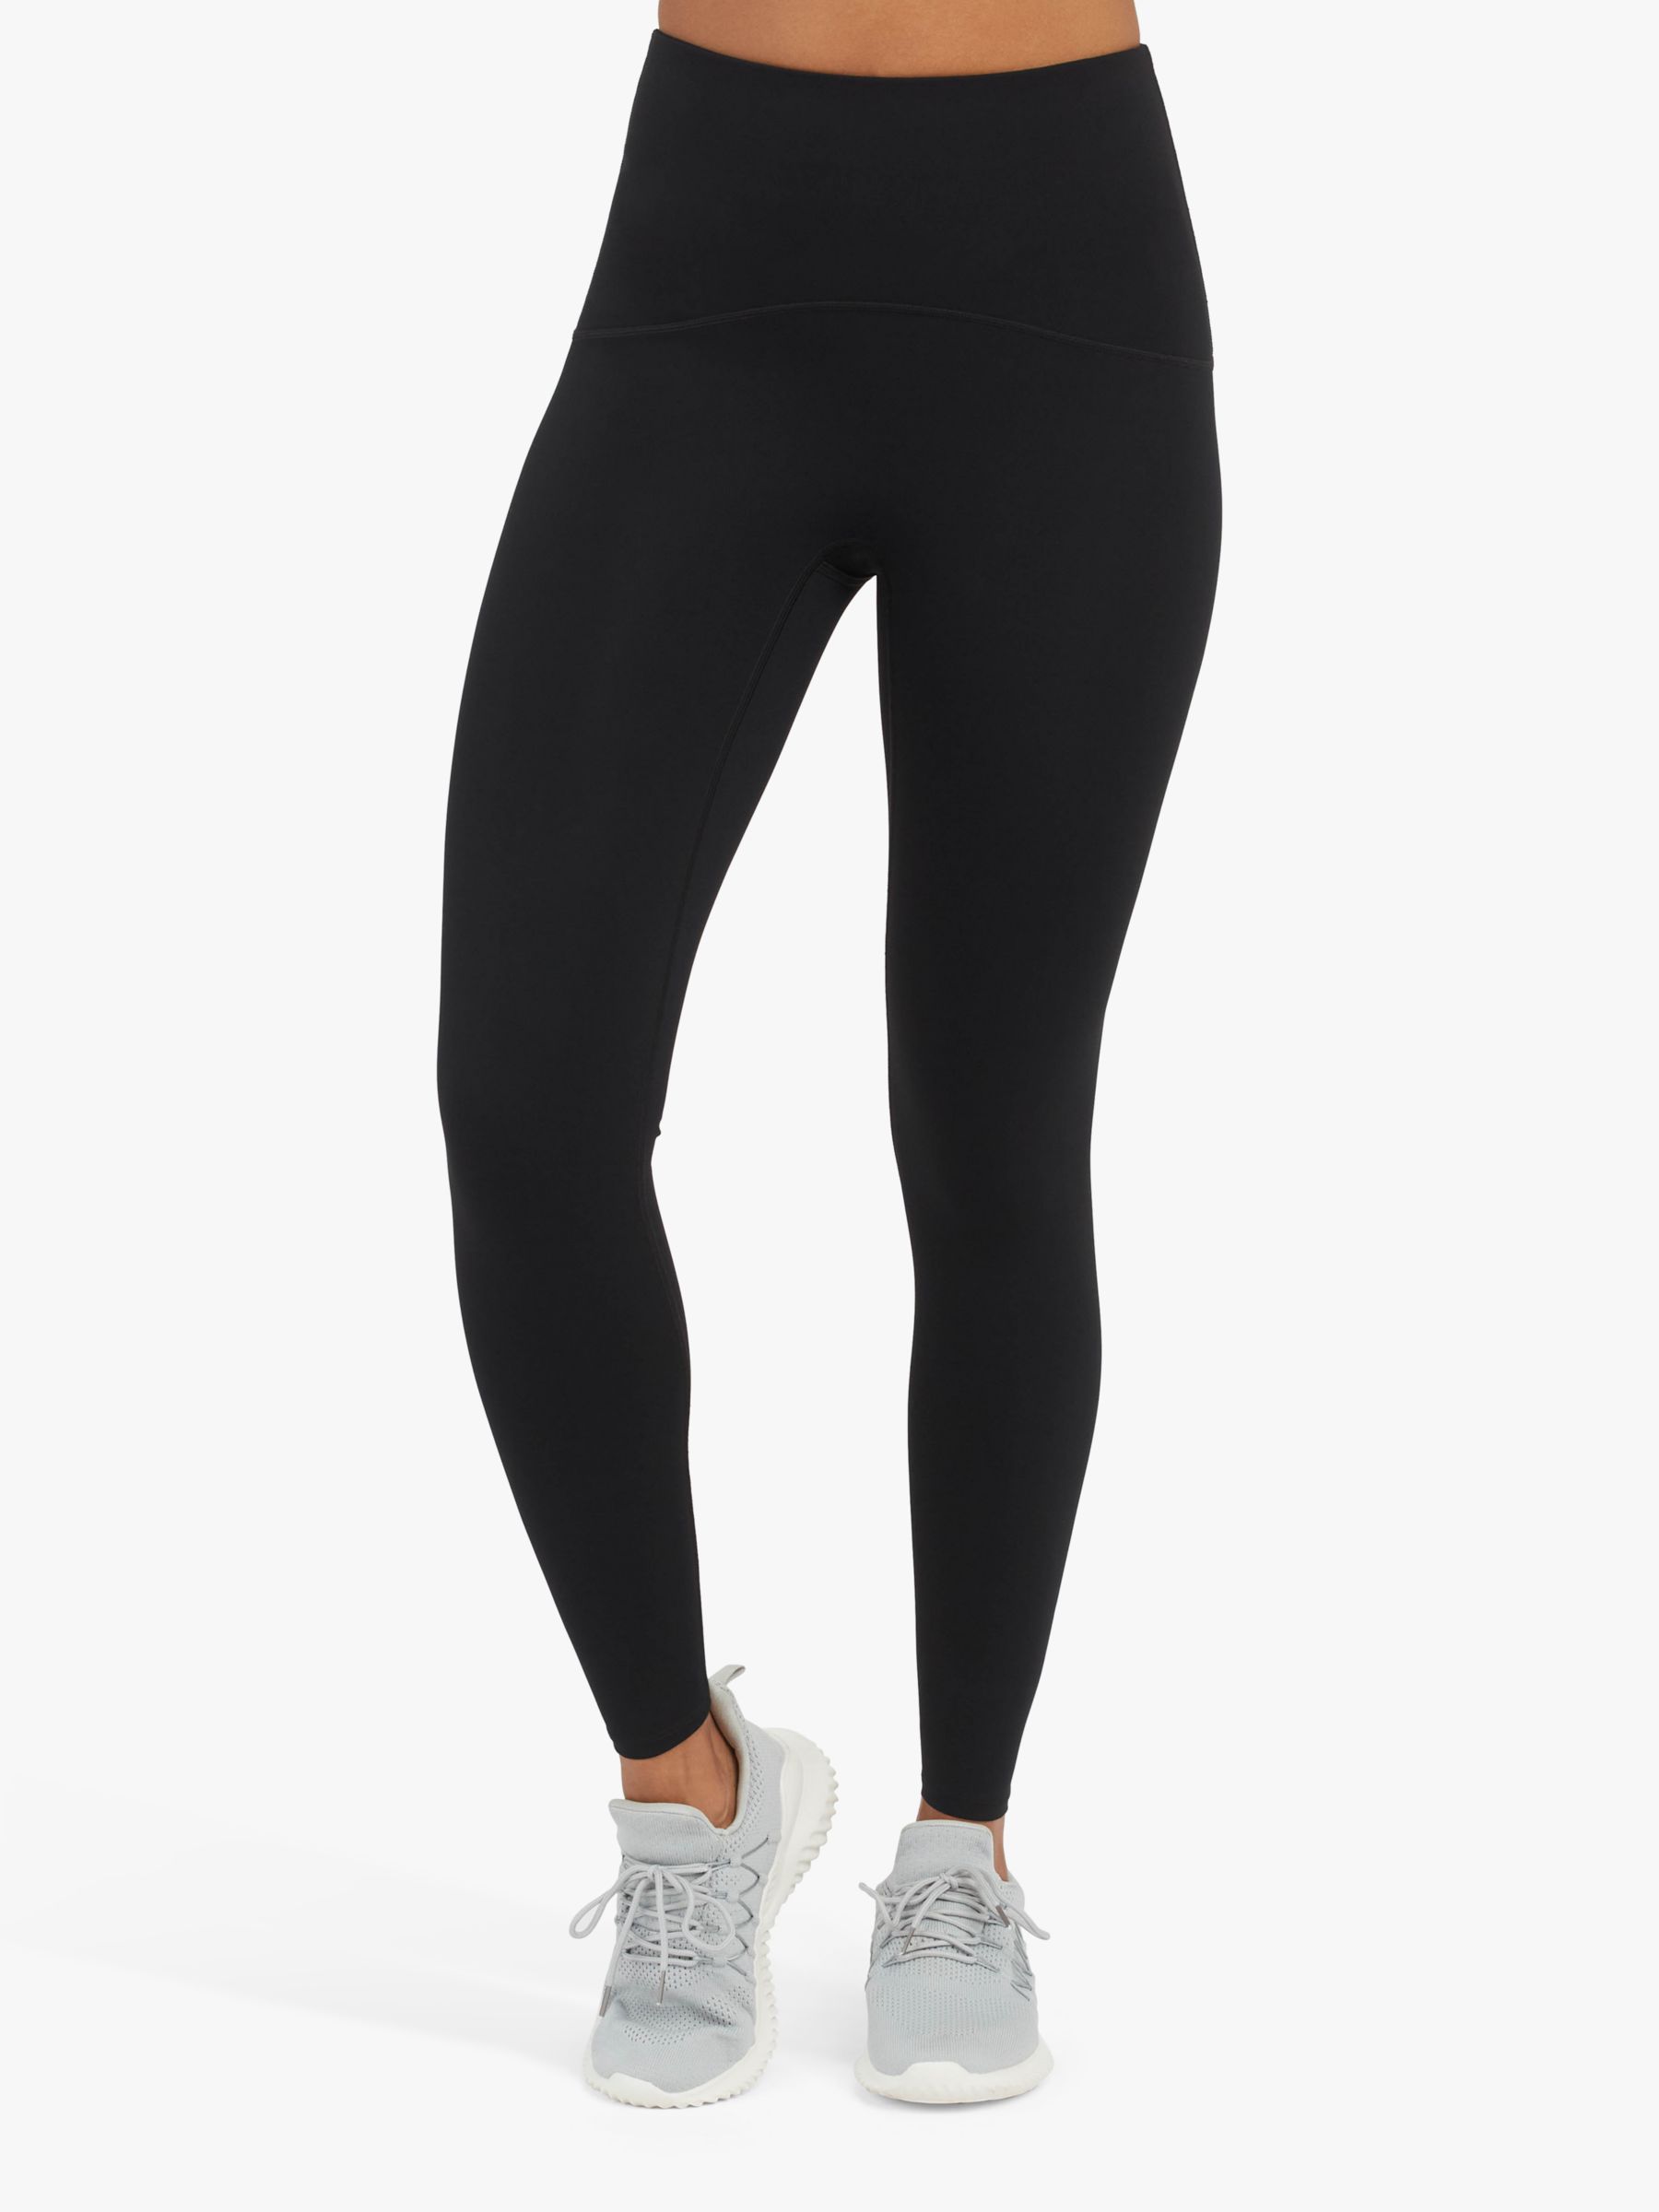 Booty Boost Active high-rise stretch leggings